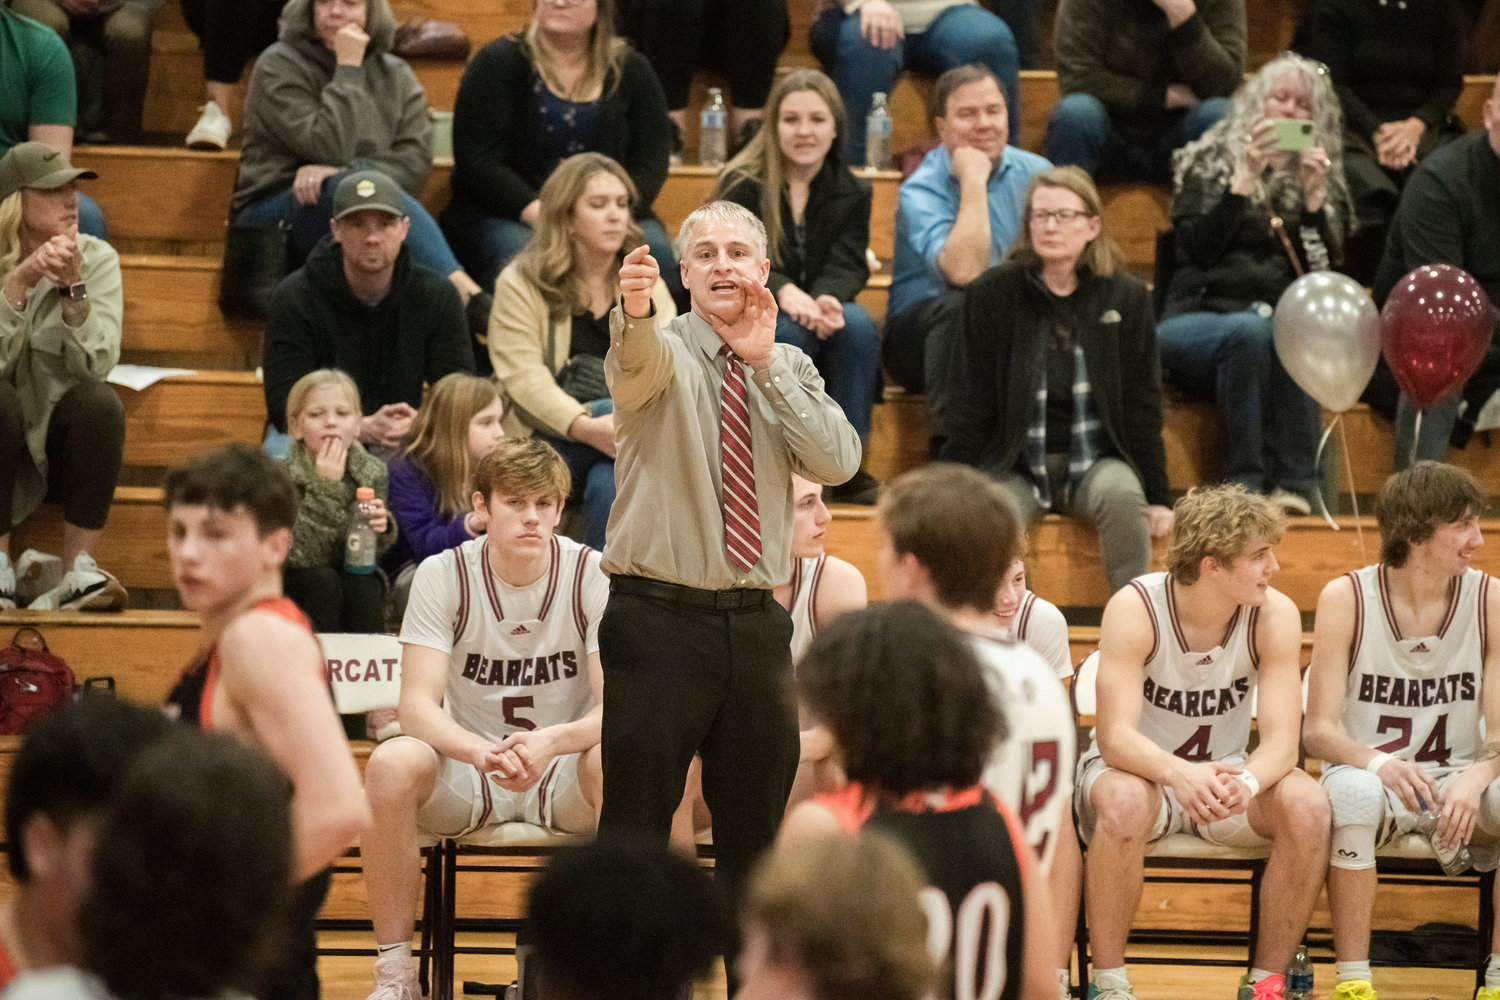 W.F. West Head Coach Chris White points athletes into position during a Tuesday night game in Chehalis.